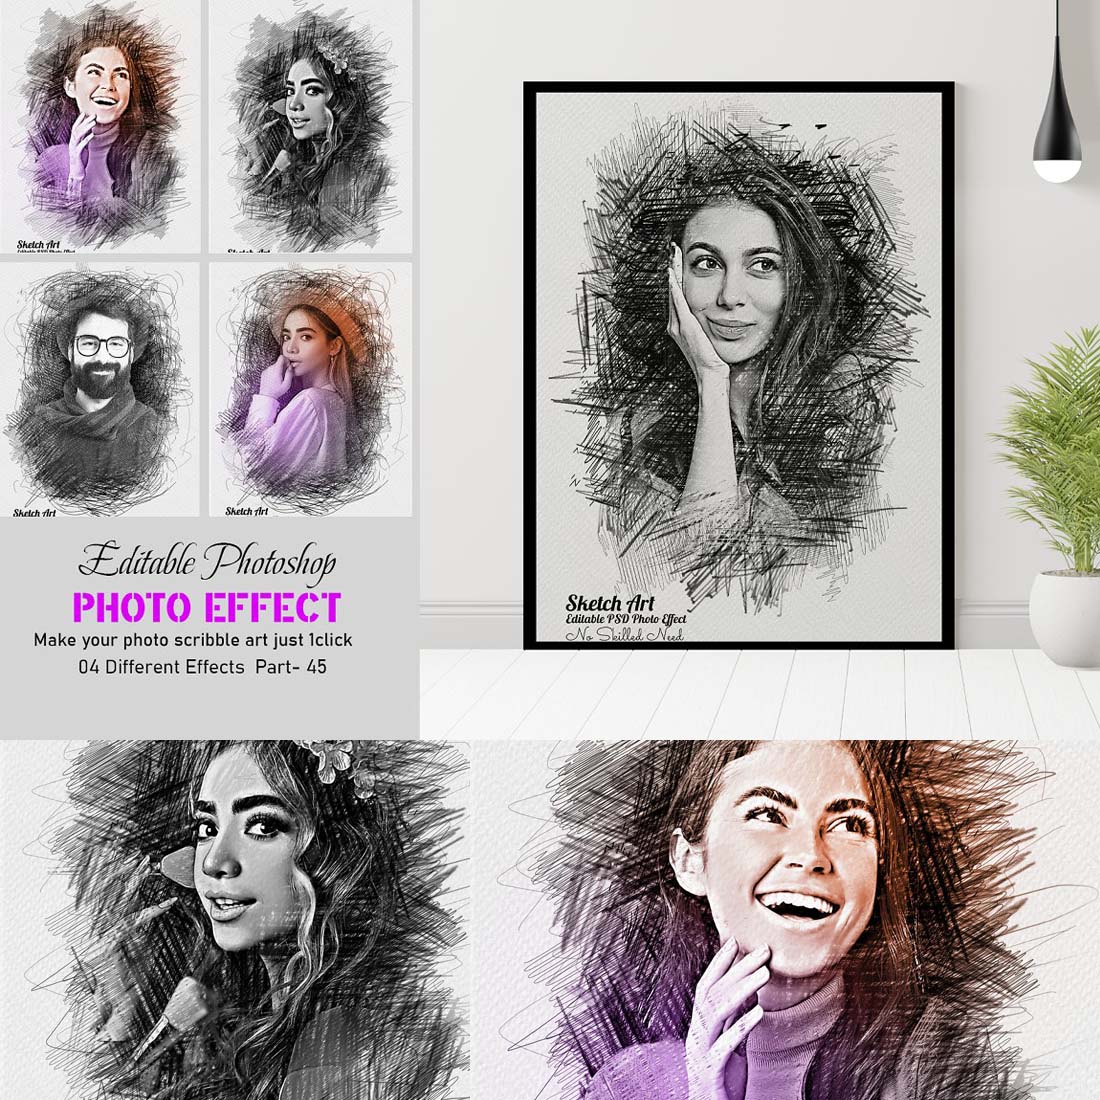 Sketch Art Photoshop Photo Effect cover image.